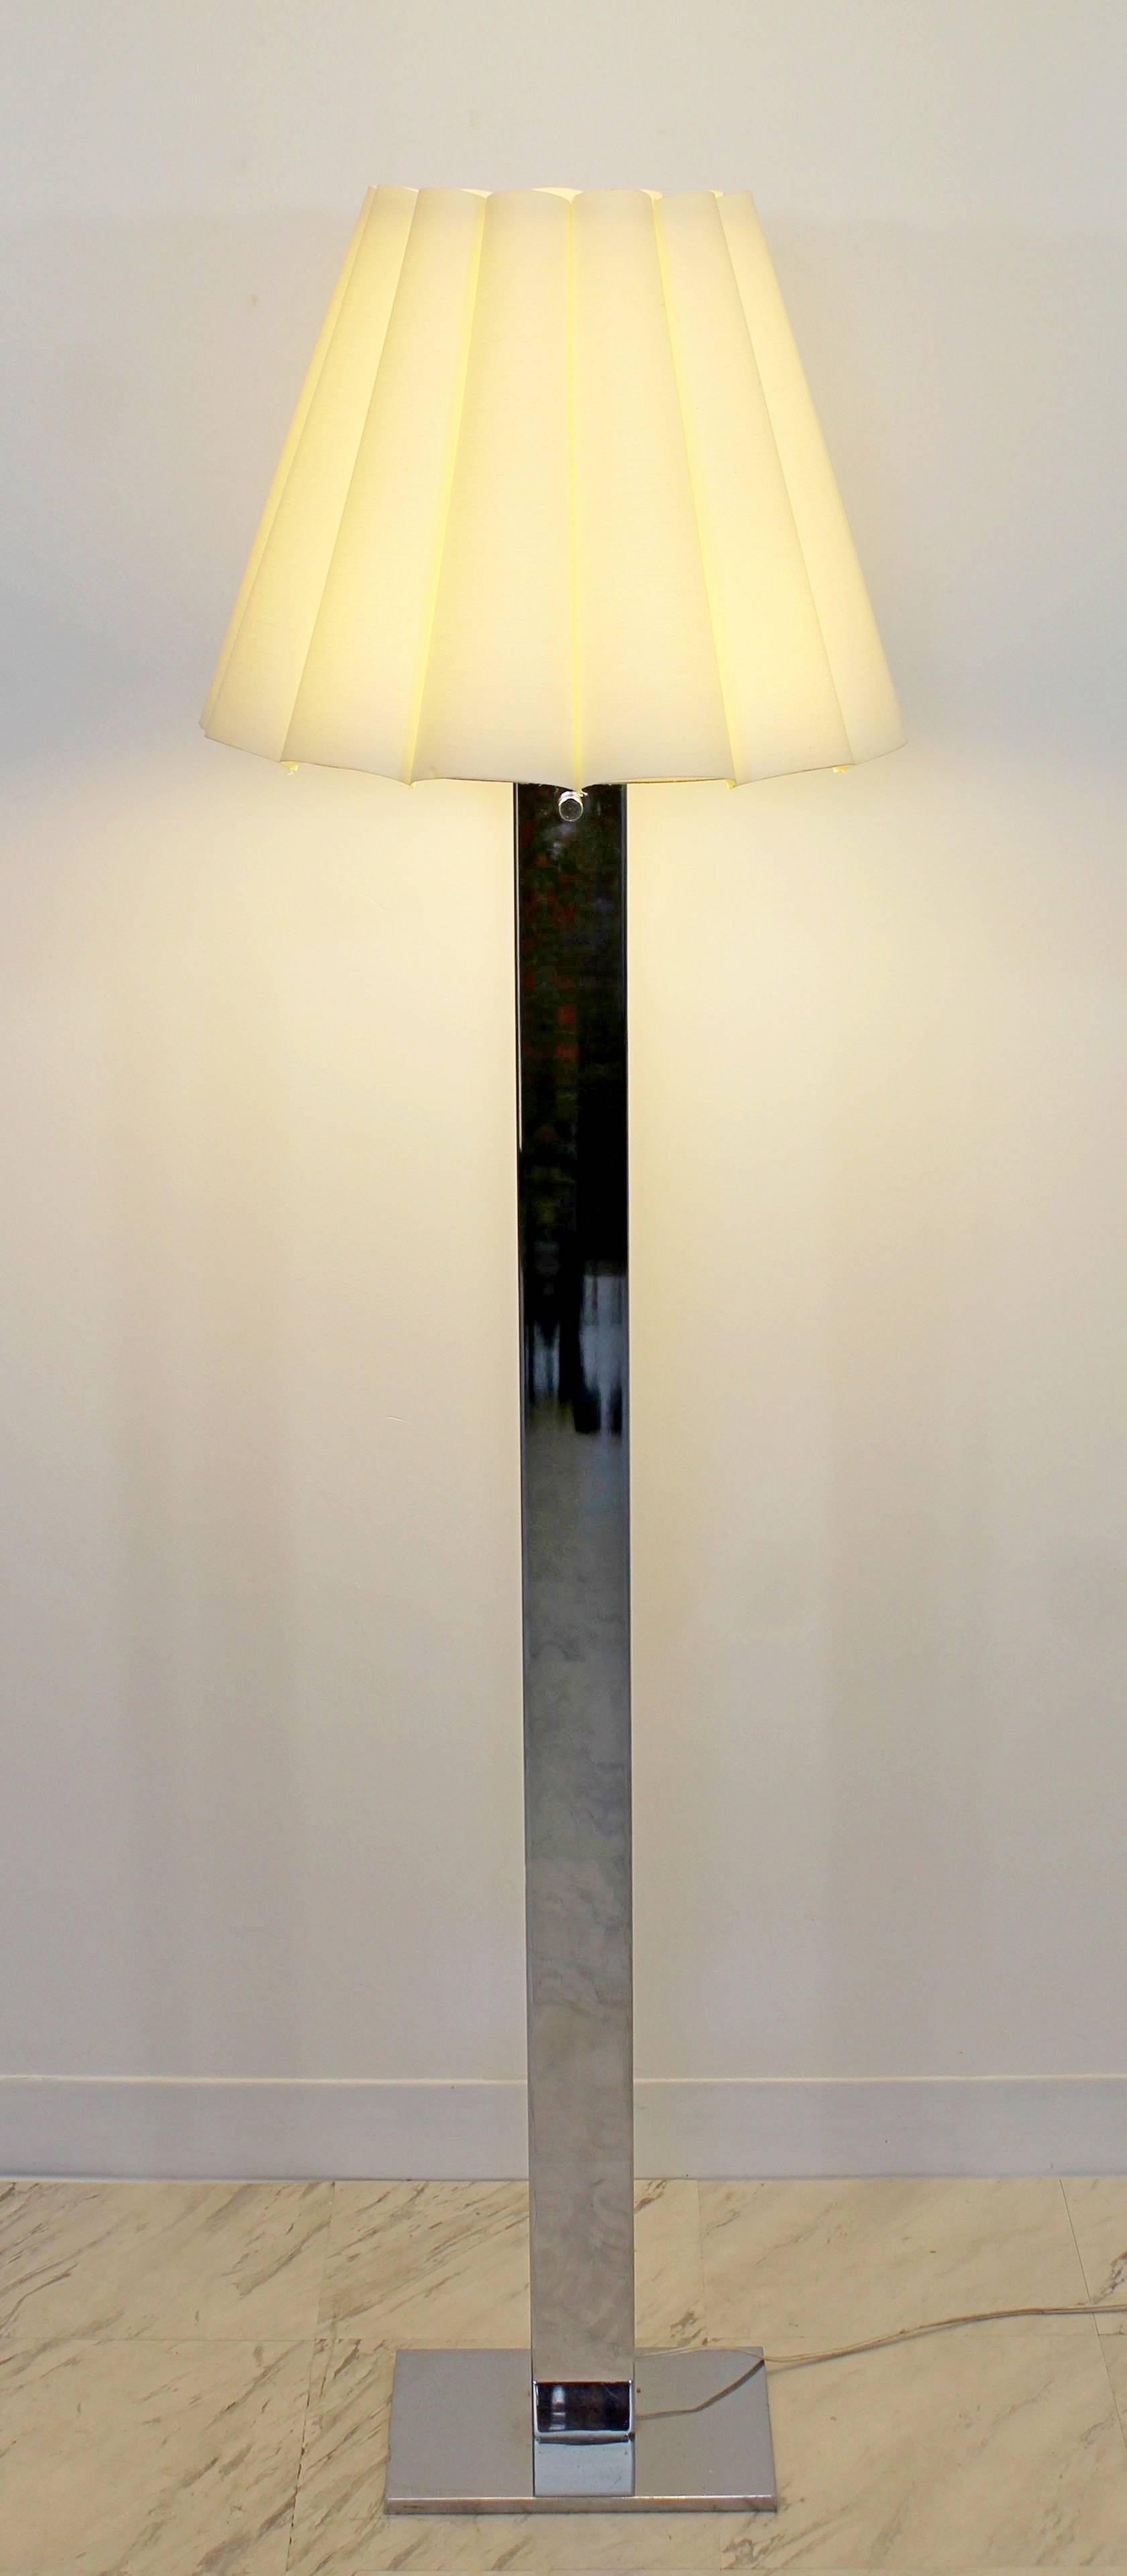 For your consideration is a Robert Sonneman five bulb floor lamp, made of polished steel chrome, with original shade and finial, circa the 1970s. In excellent condition. The dimensions of the lamp are 11